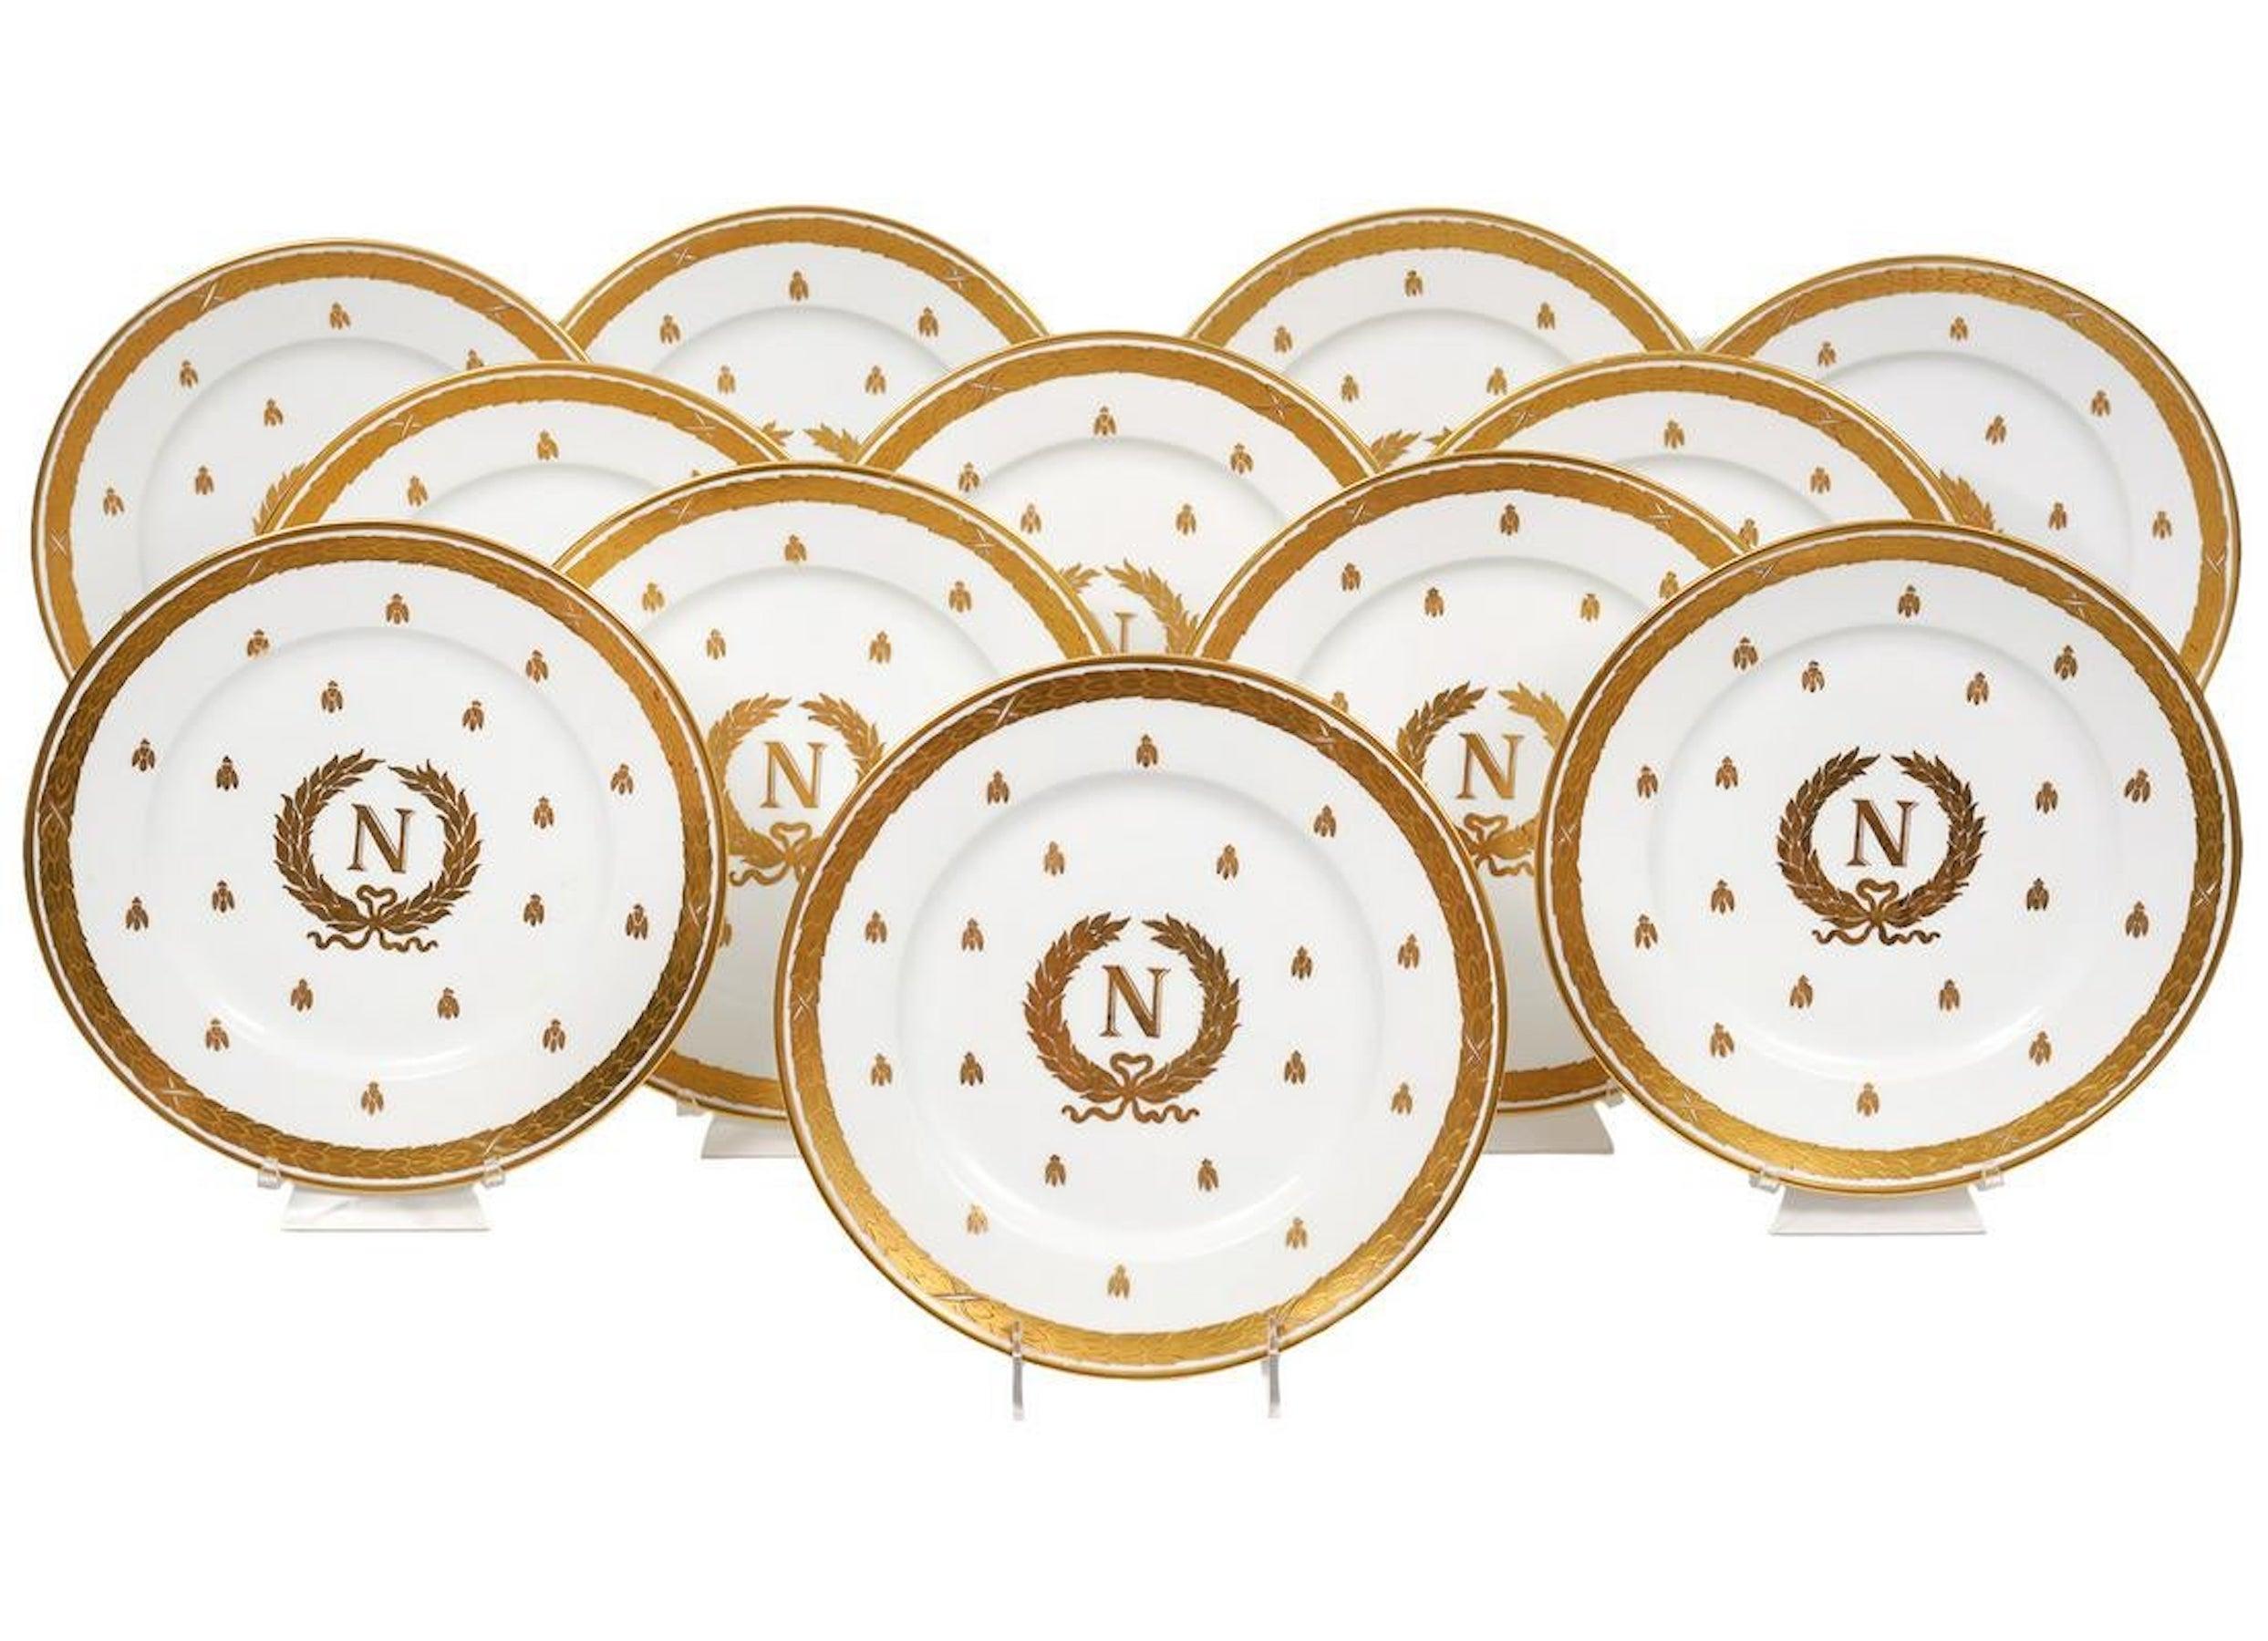 12 Limoges raised gilt enameled Napoleonic plates, circa 1900, each one decorated with gilt laurel surround, filled with golden bees, the center with Napoleonic crest of laurel wreath and monogrammed 'N'.
The porcelain is made by Charles Ahrenfeldt